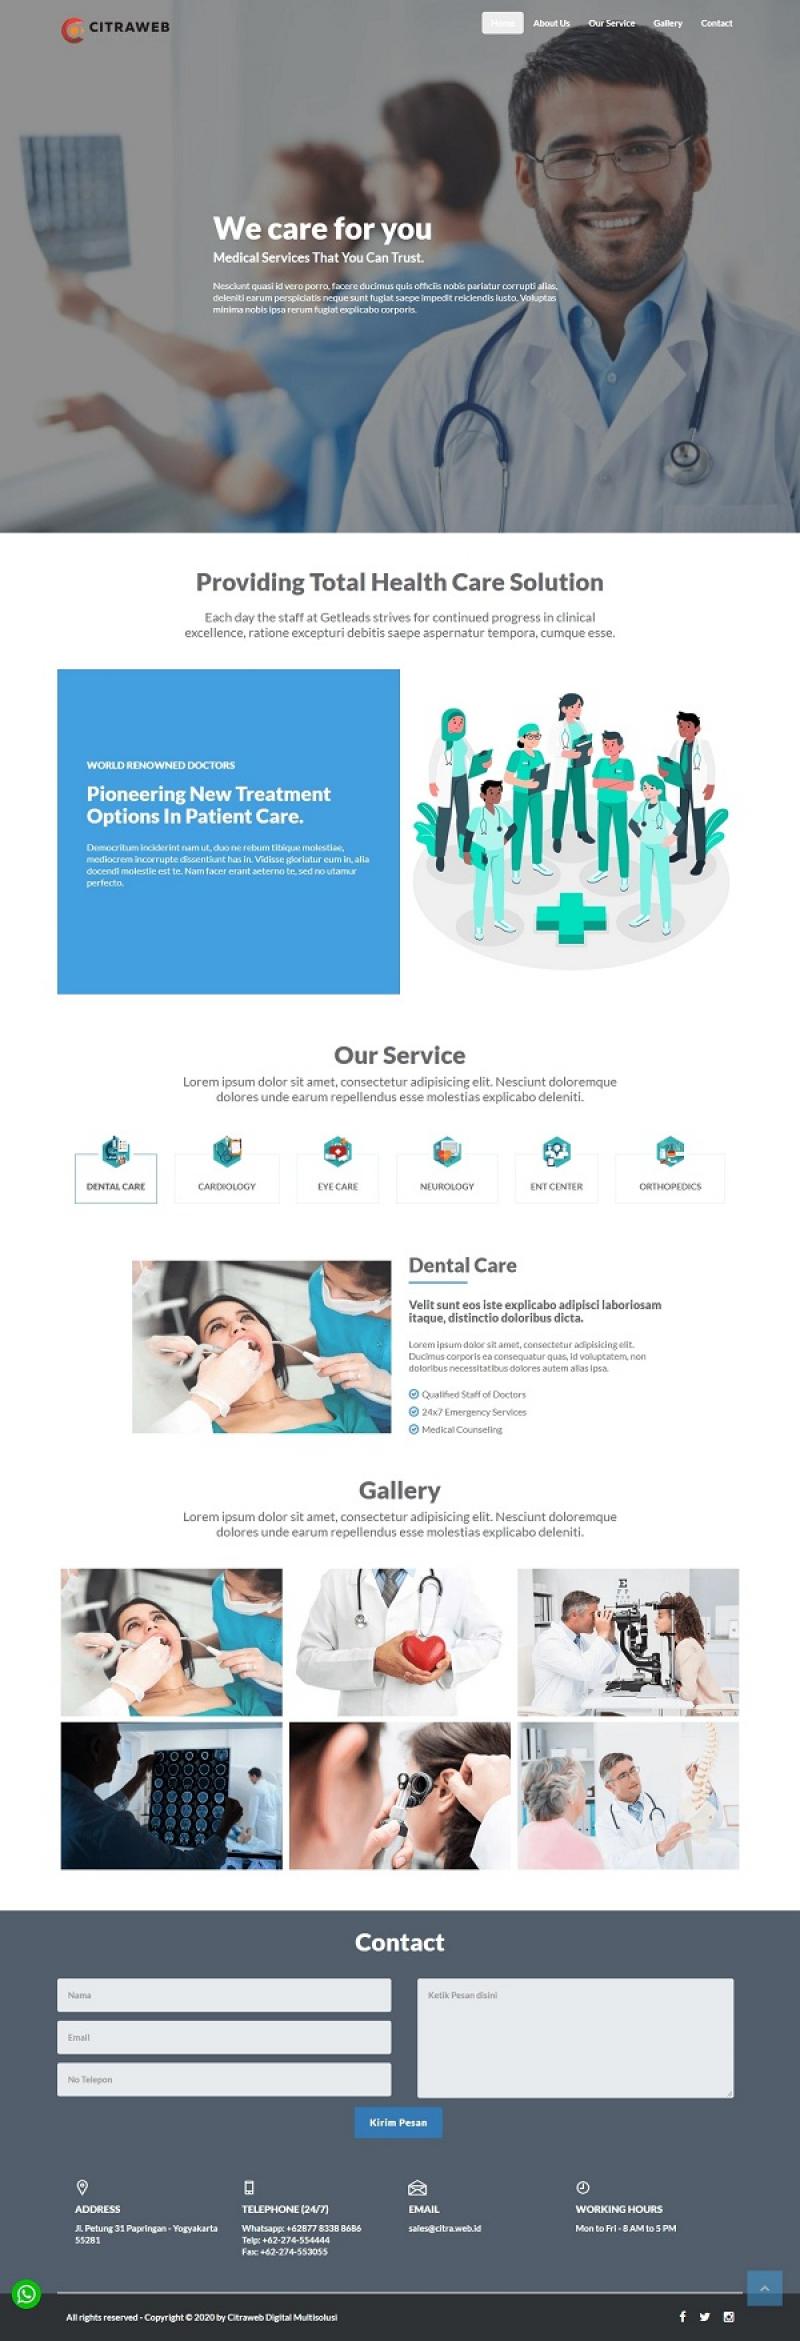 12 - LANDING PAGE - HEALTHCARE